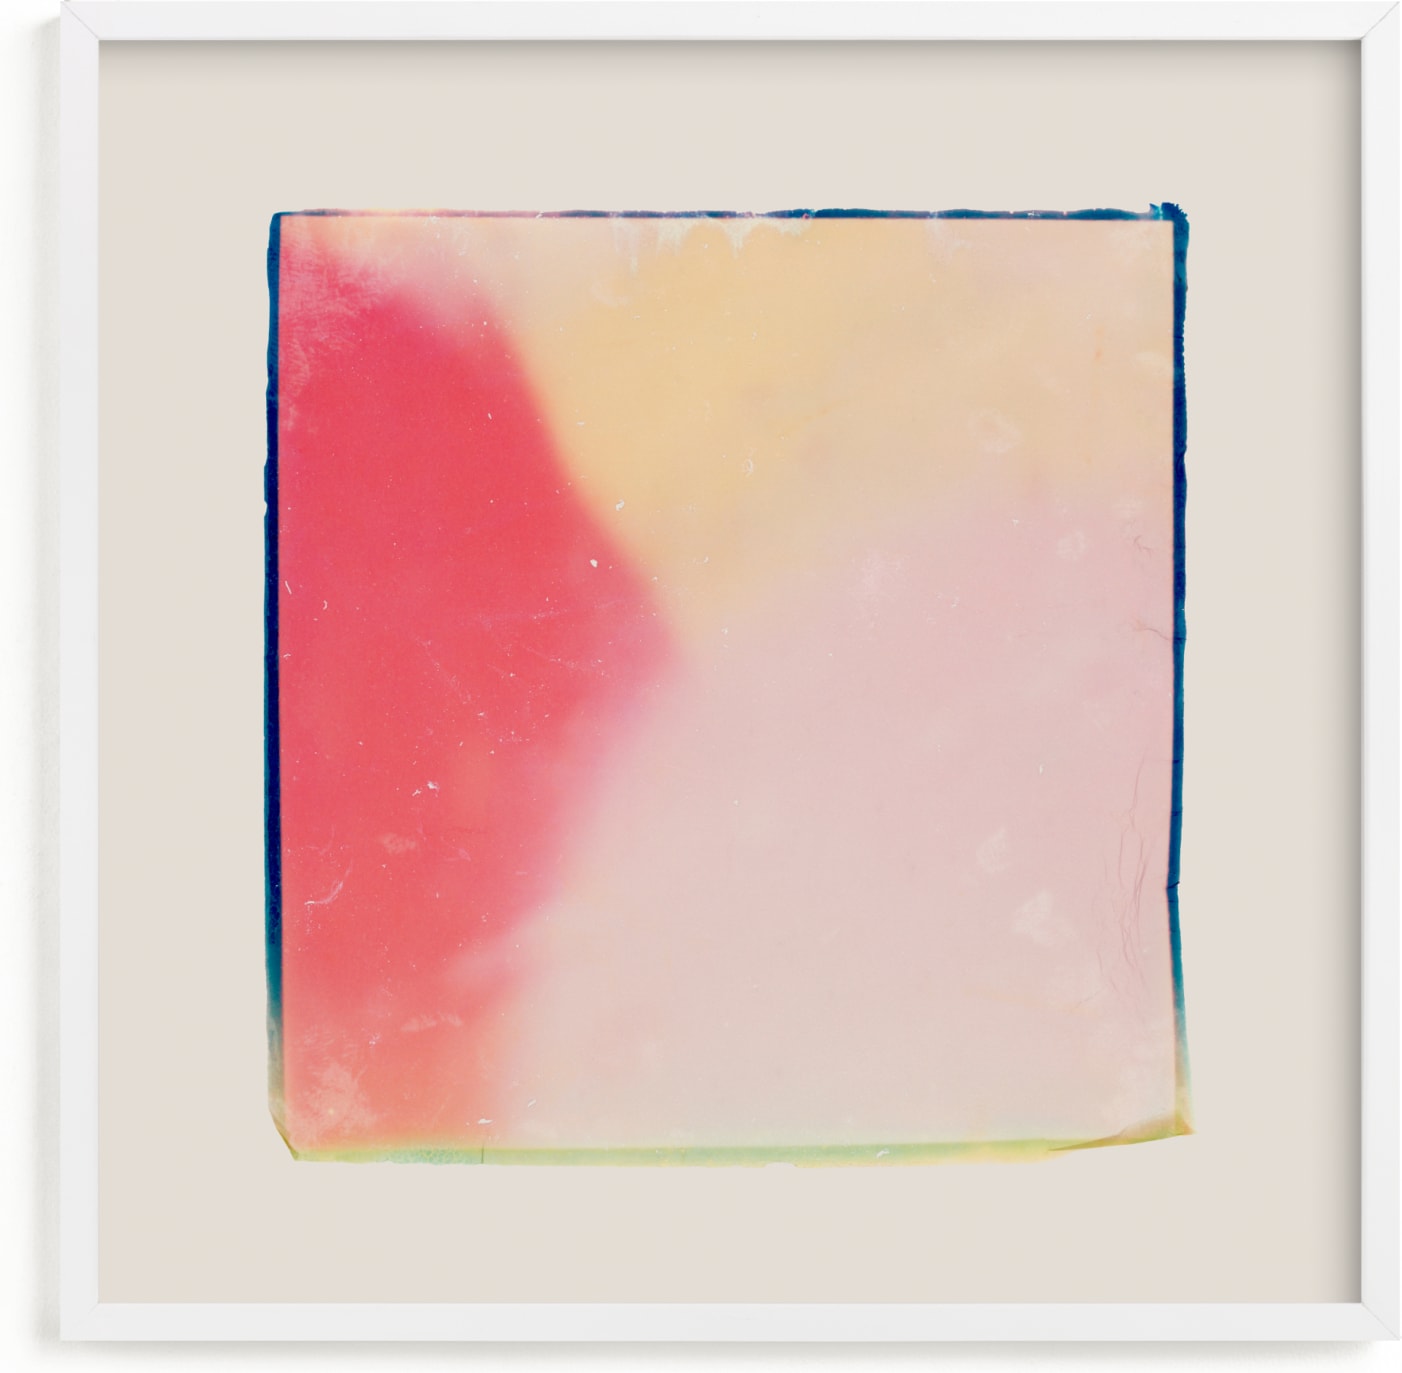 This is a yellow, pink art by Kamala Nahas called Four Square IV.